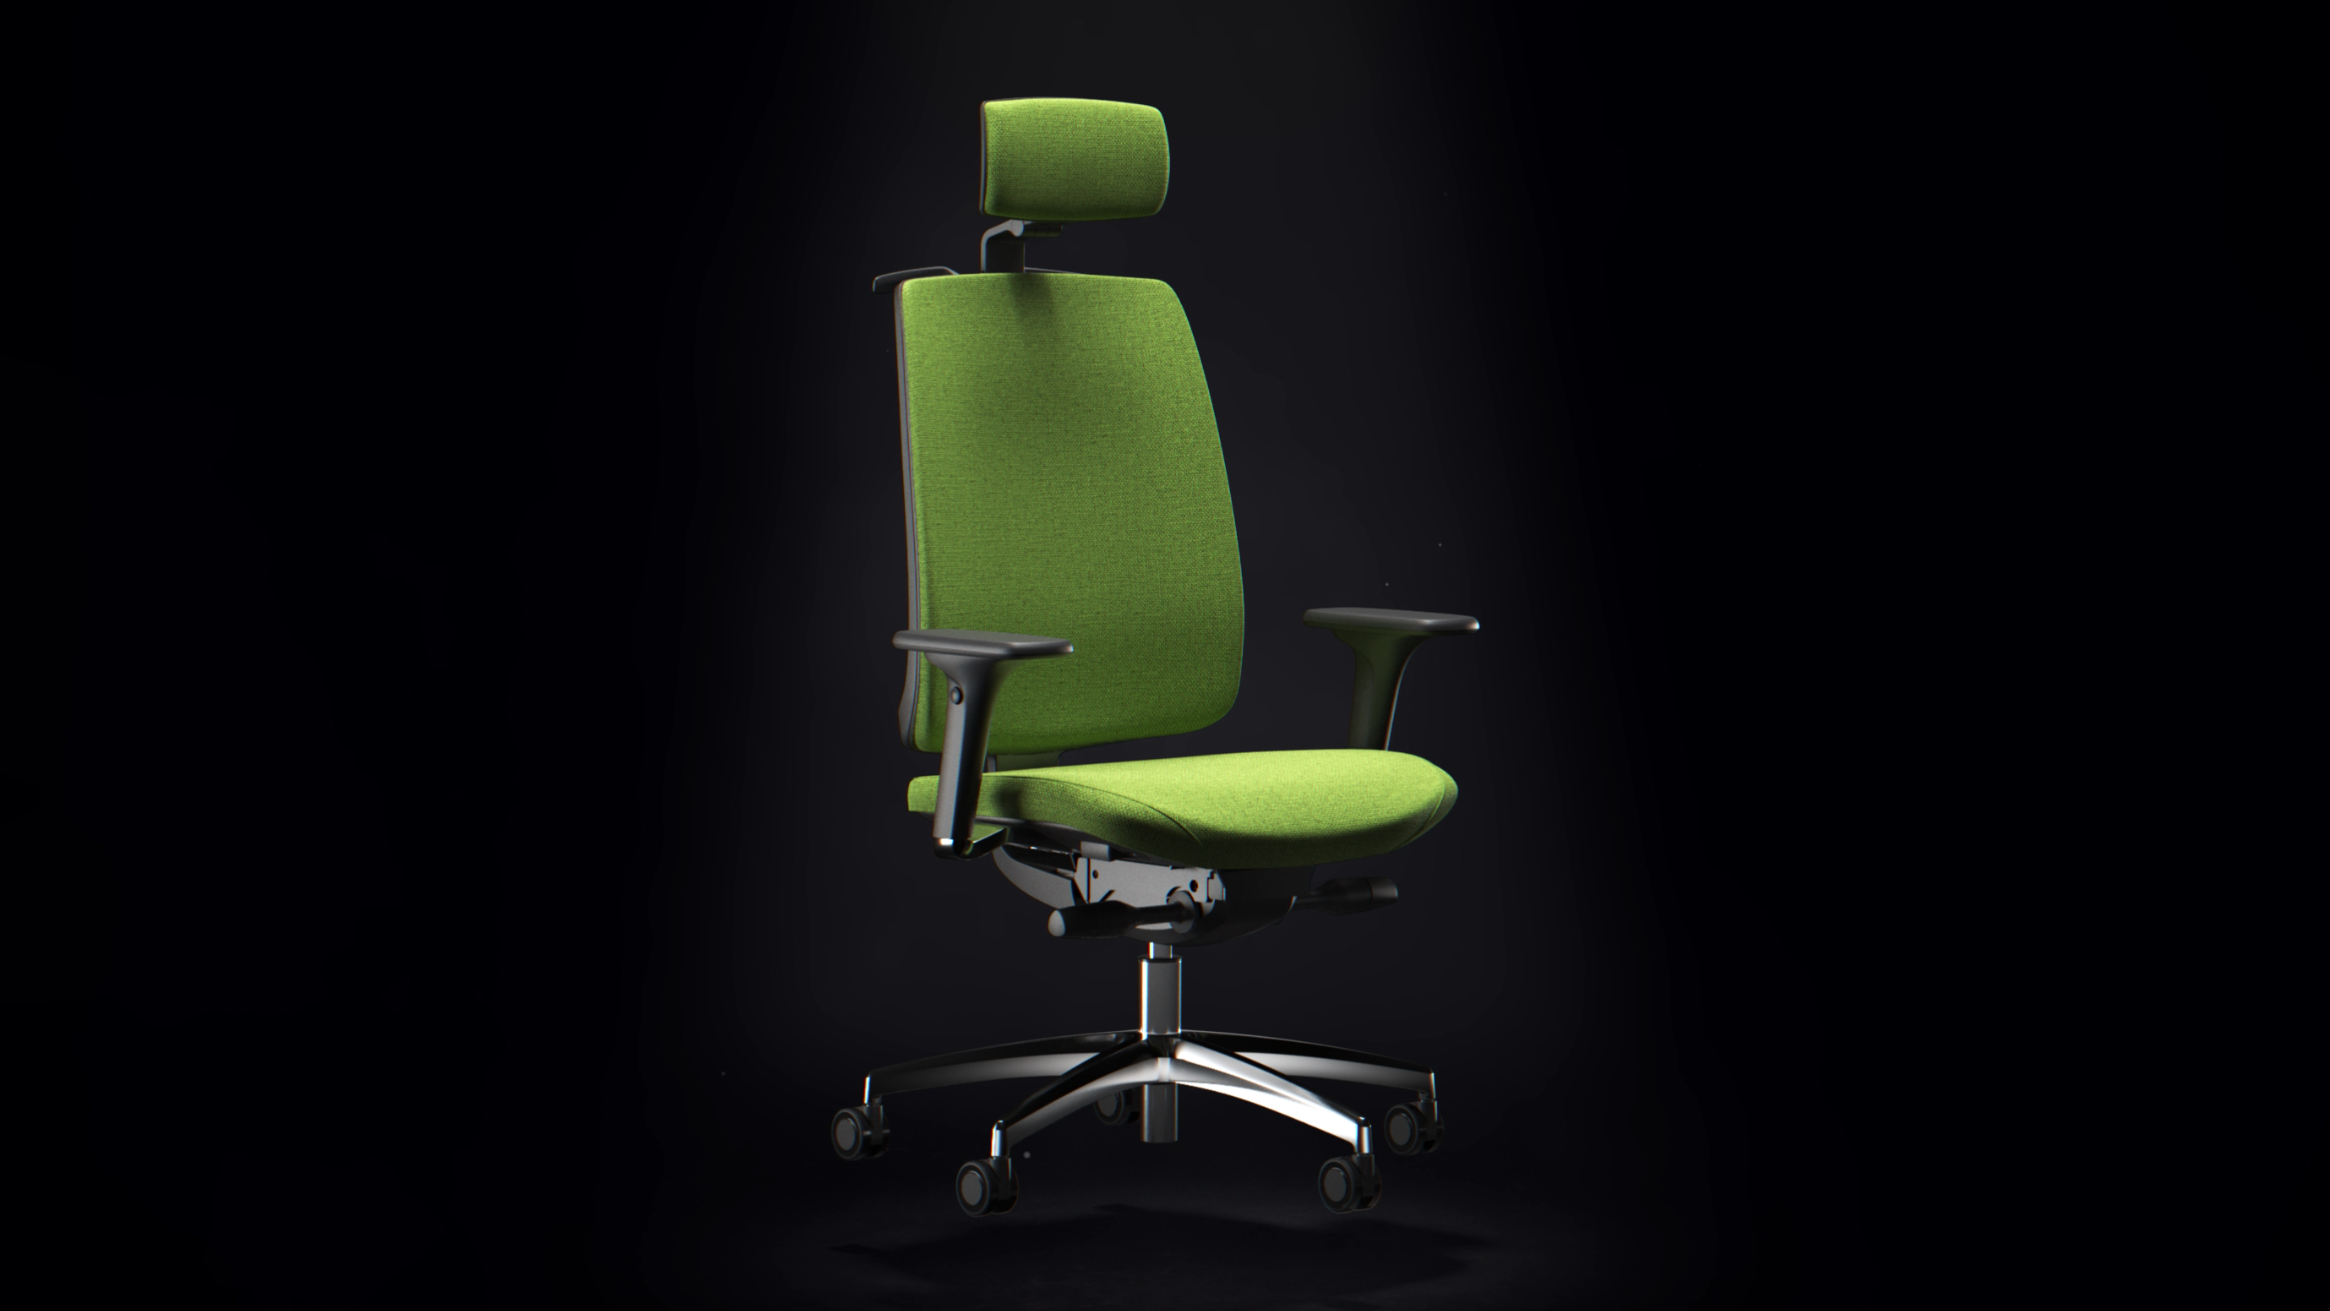 Modena Task Chair Overview